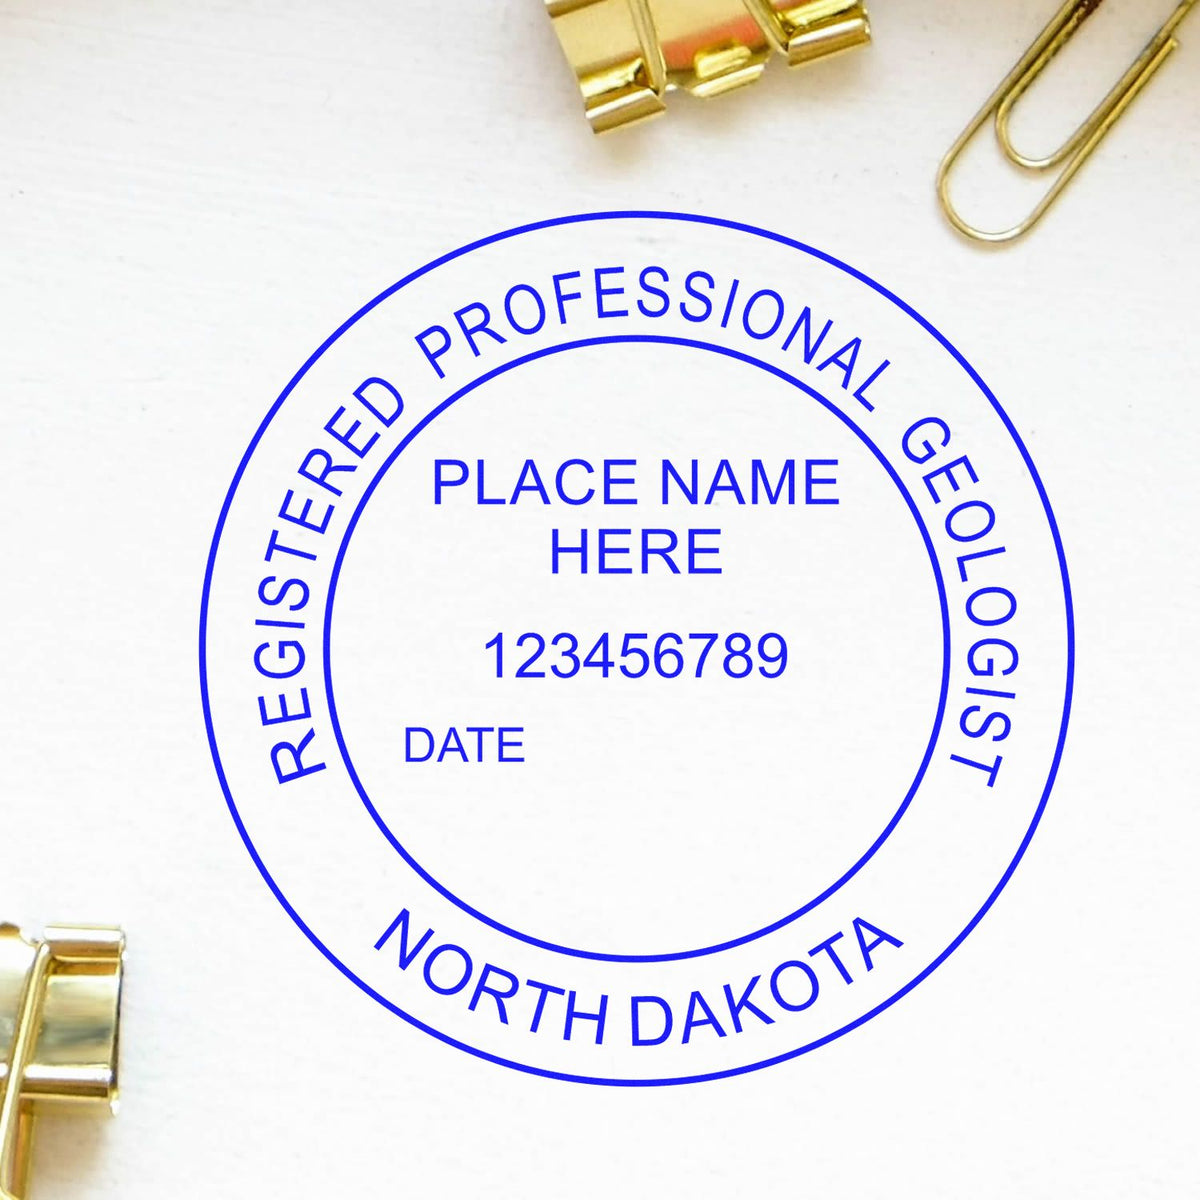 An alternative view of the North Dakota Professional Geologist Seal Stamp stamped on a sheet of paper showing the image in use